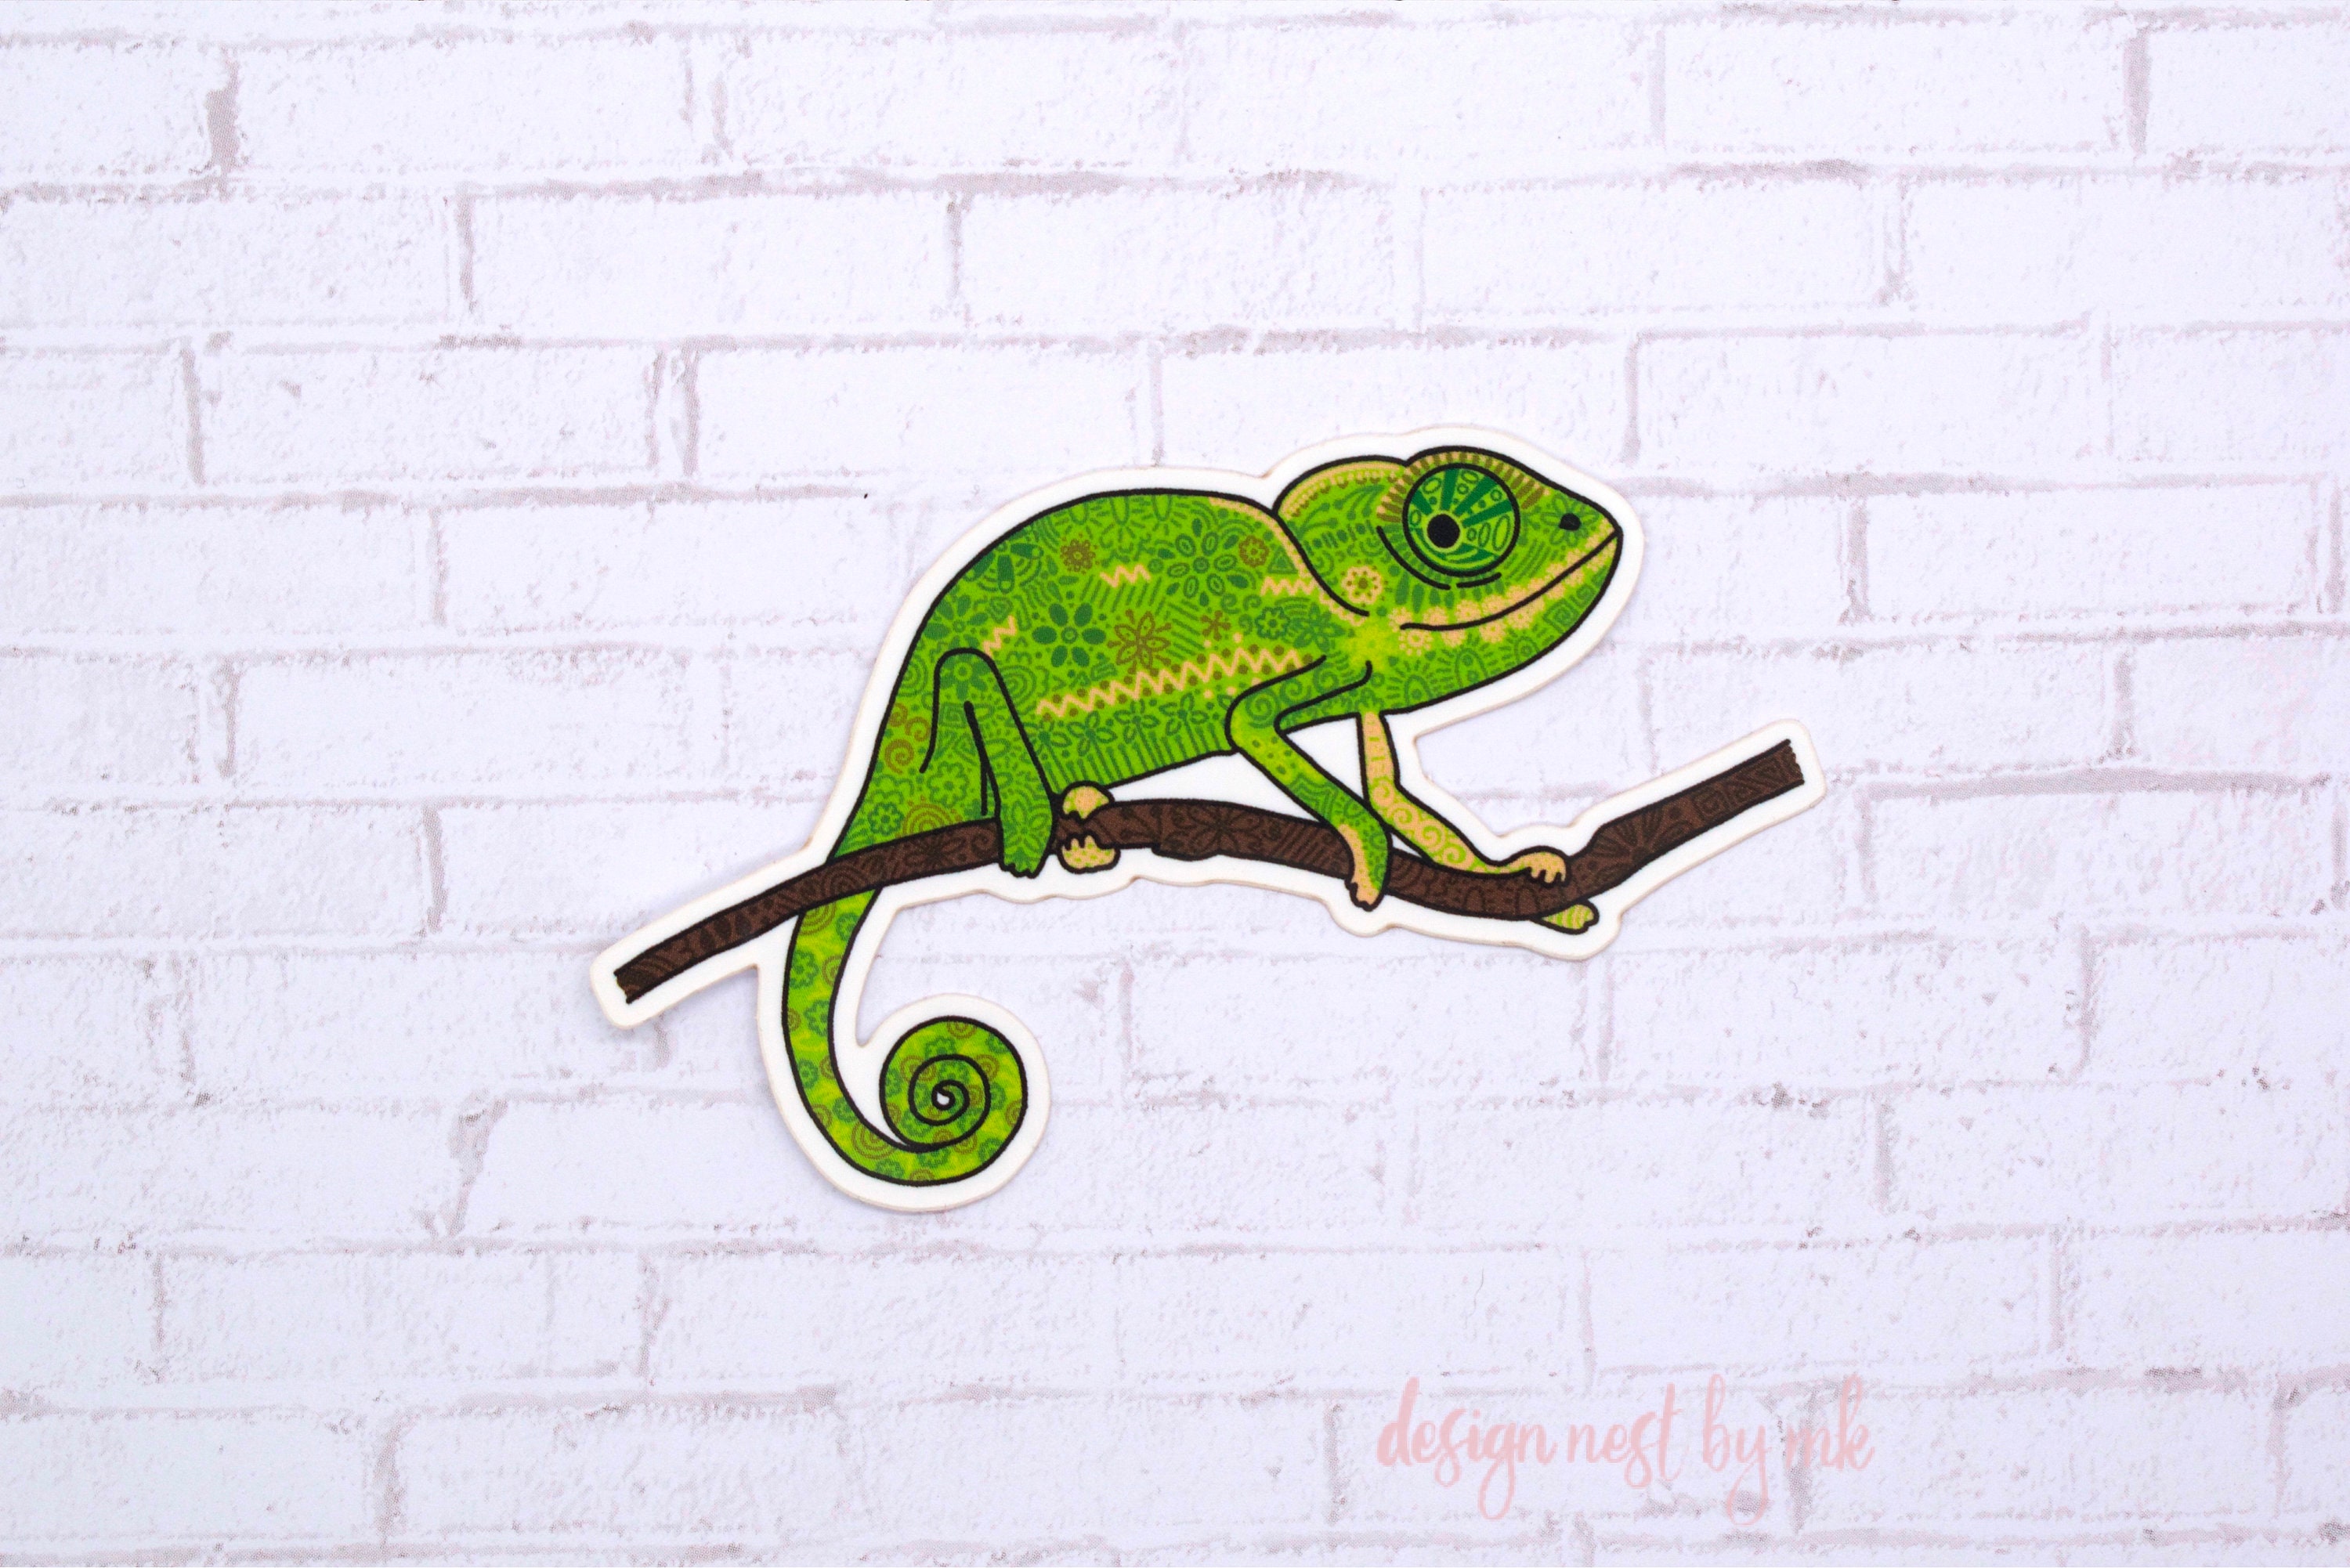 2 x Vinyl Stickers 10cm Awesome Green Chameleon Reptiles Cool Gift #8590 